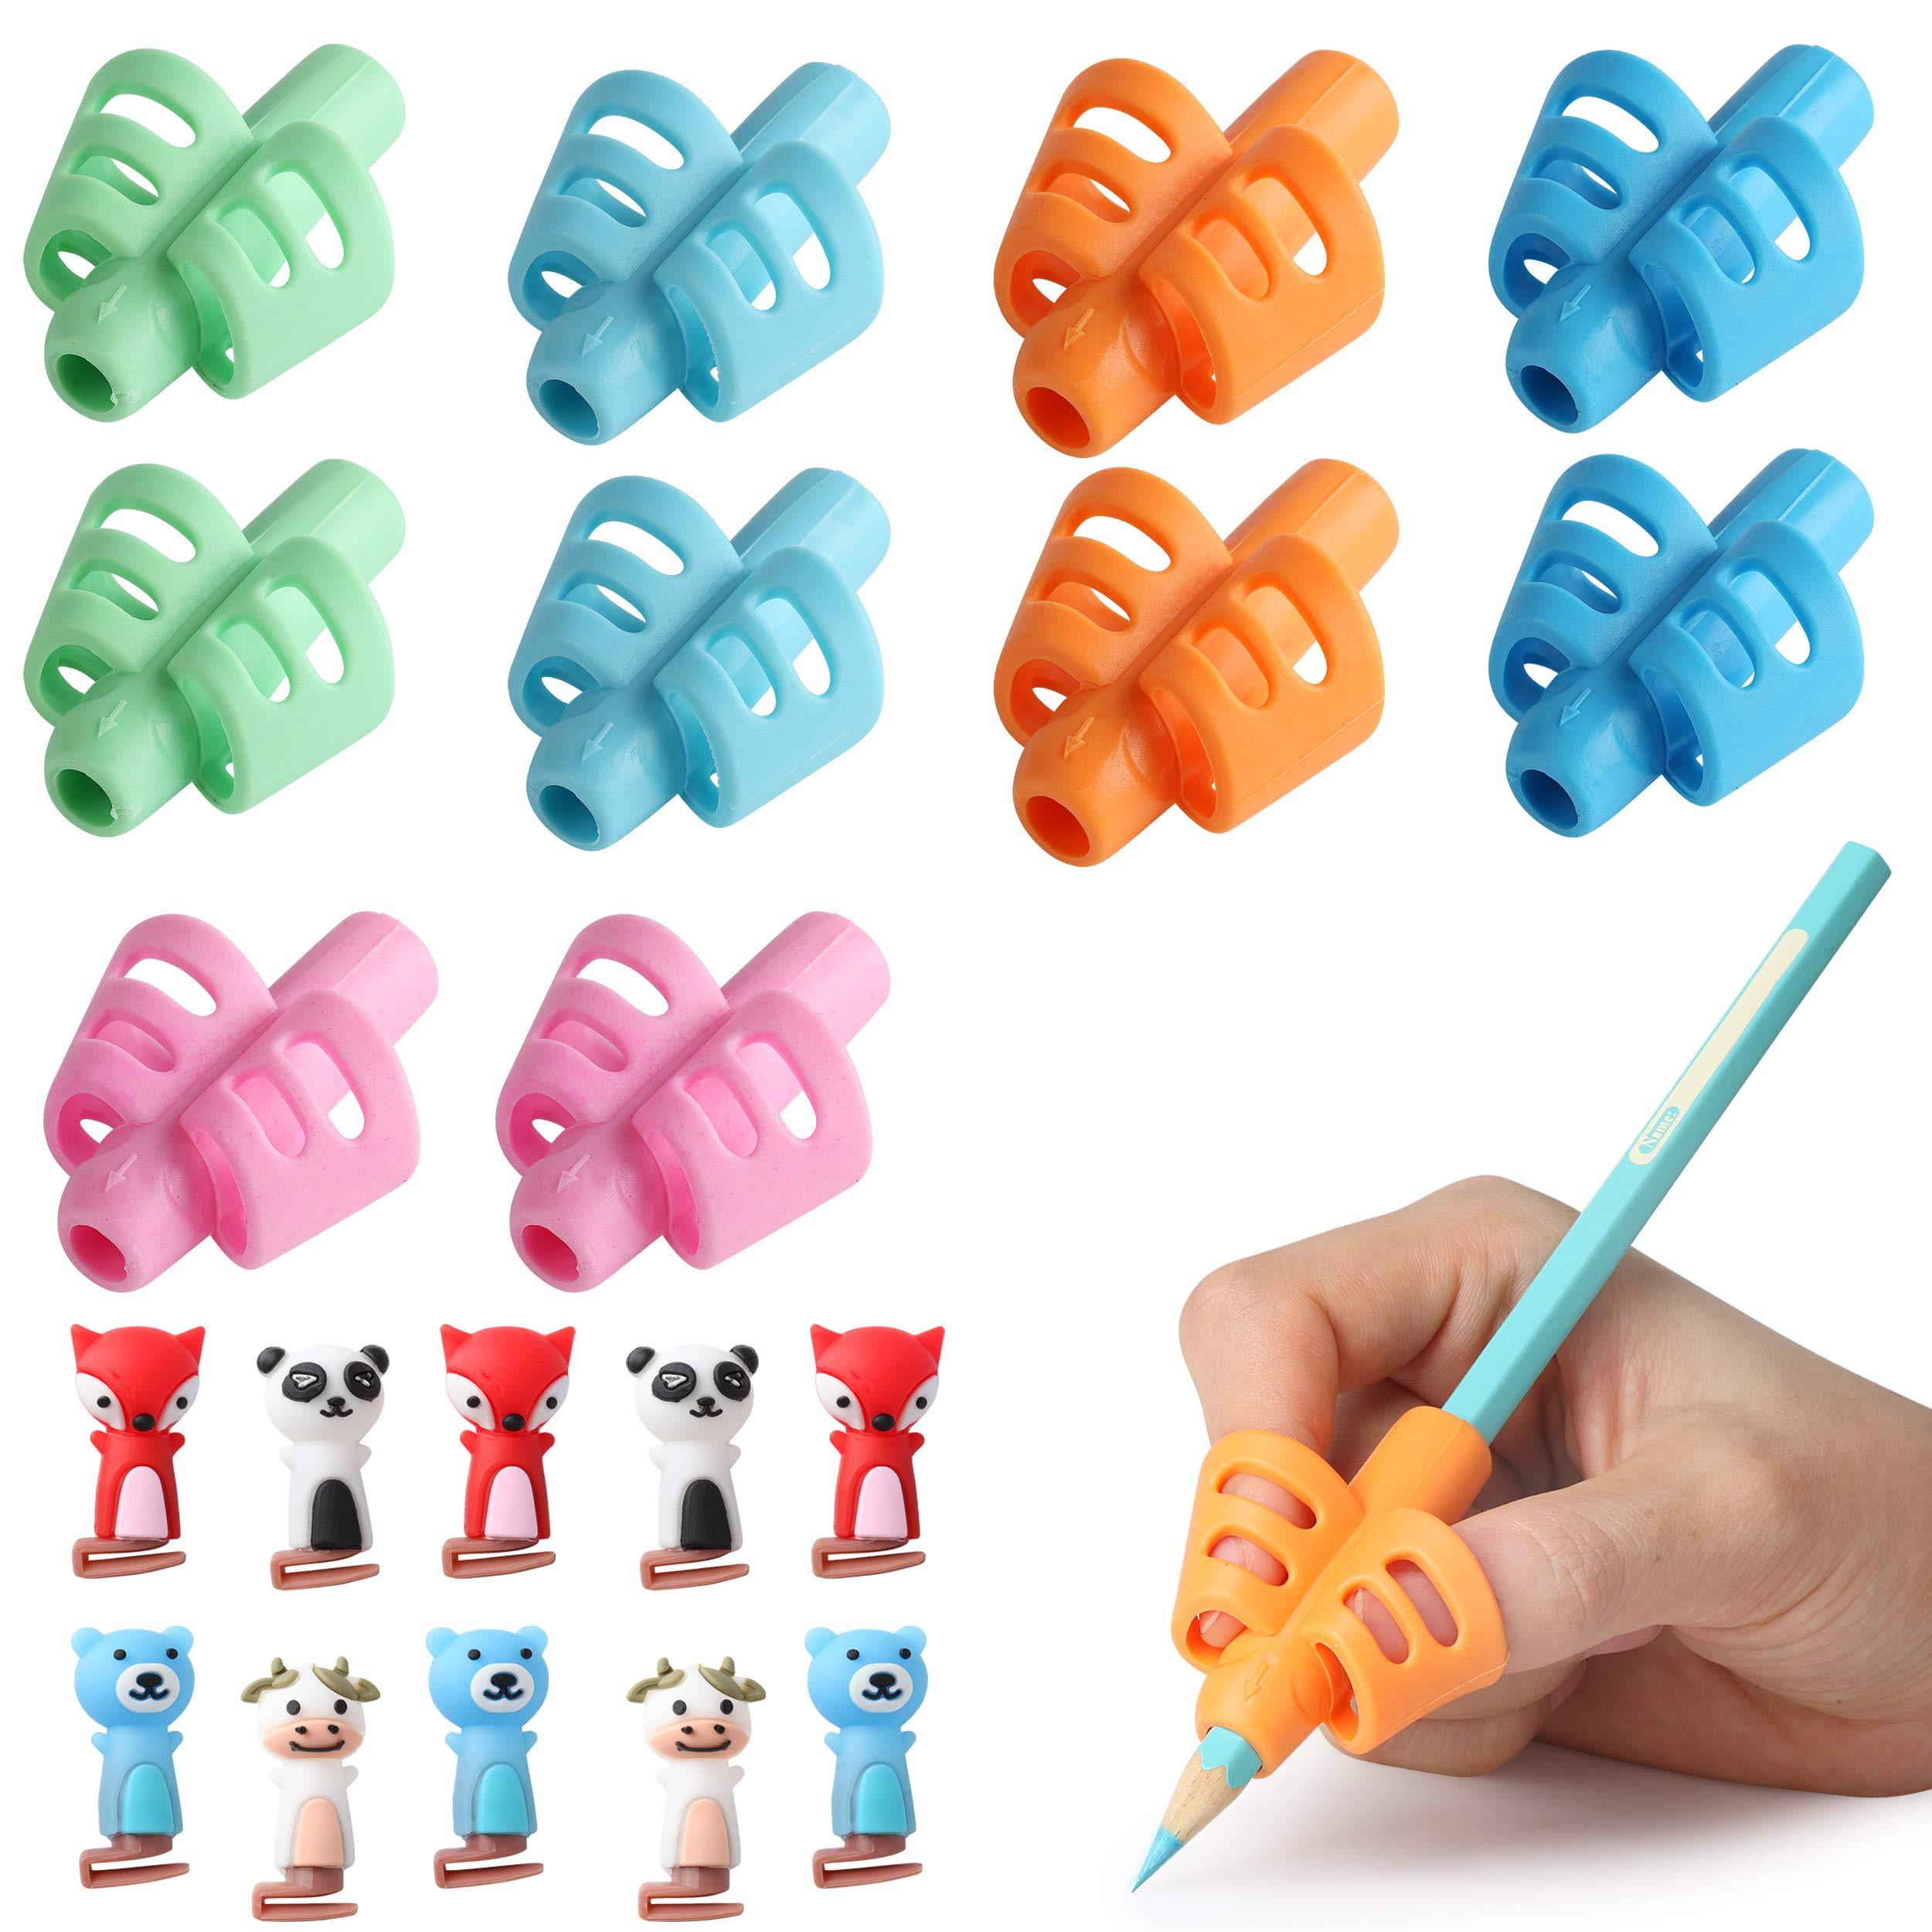 5PCS Kids Handwriting Aid Control Pencil Pen Right Left Handed Soft Grip Tool 